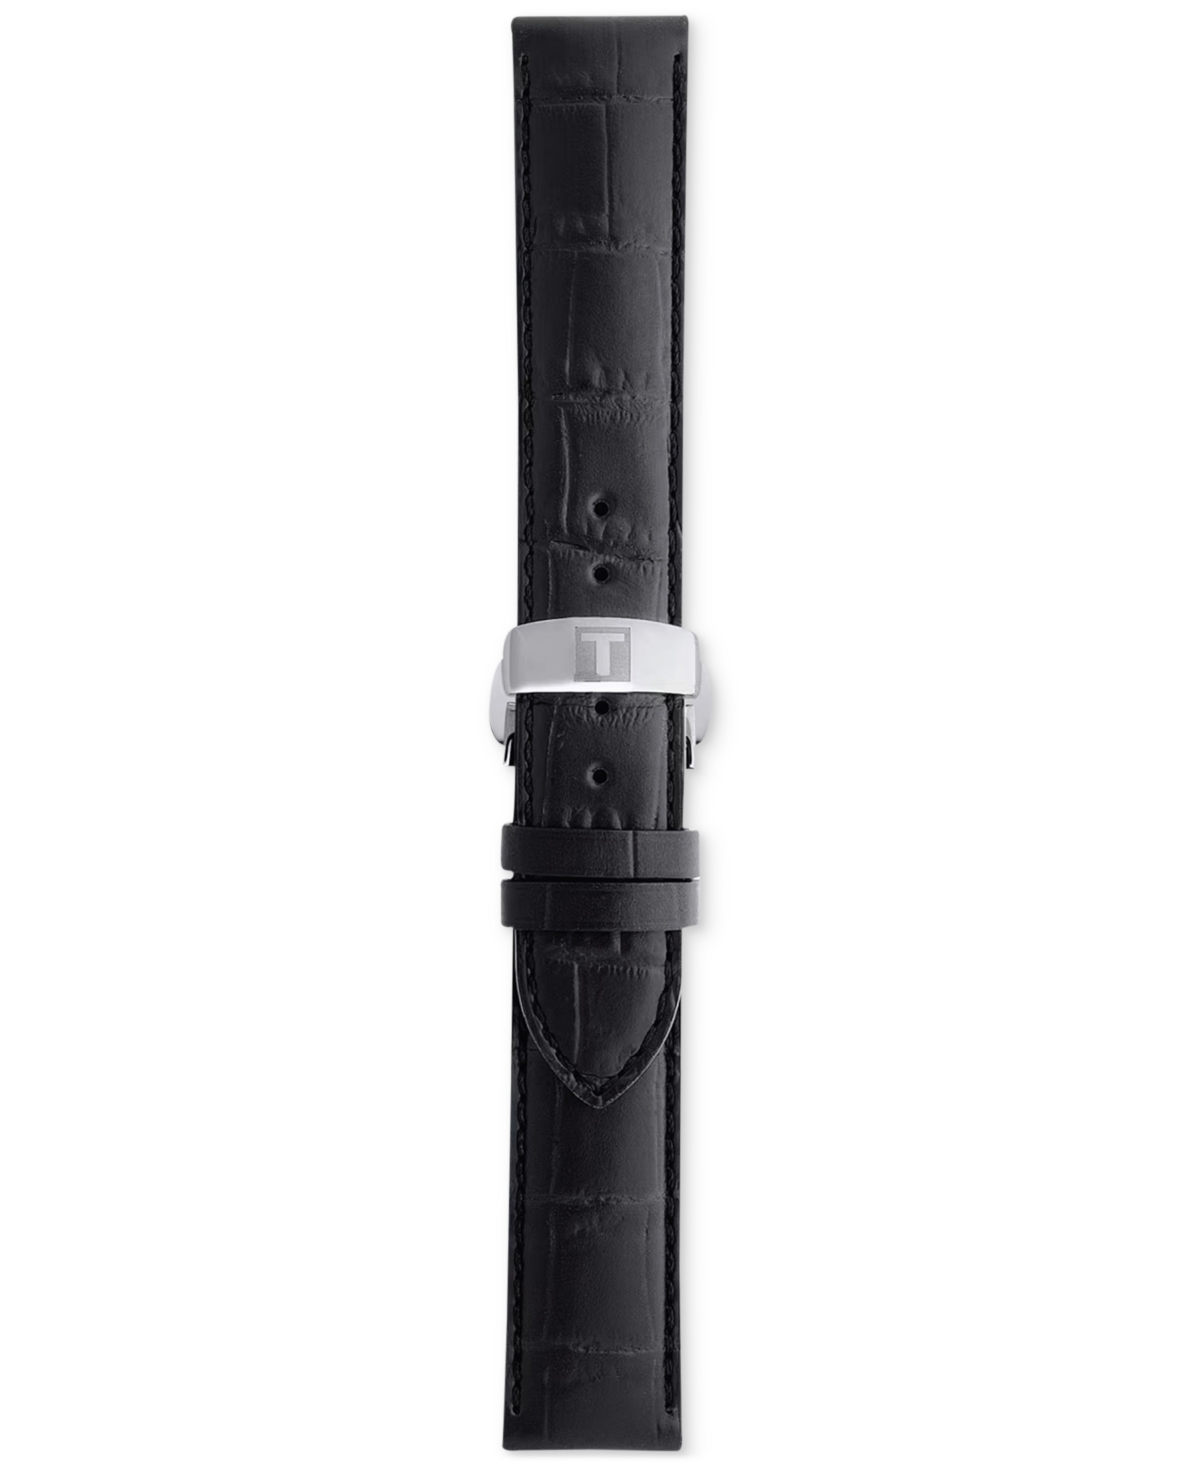 Tissot Official Interchangeable Black Leather Watch Strap